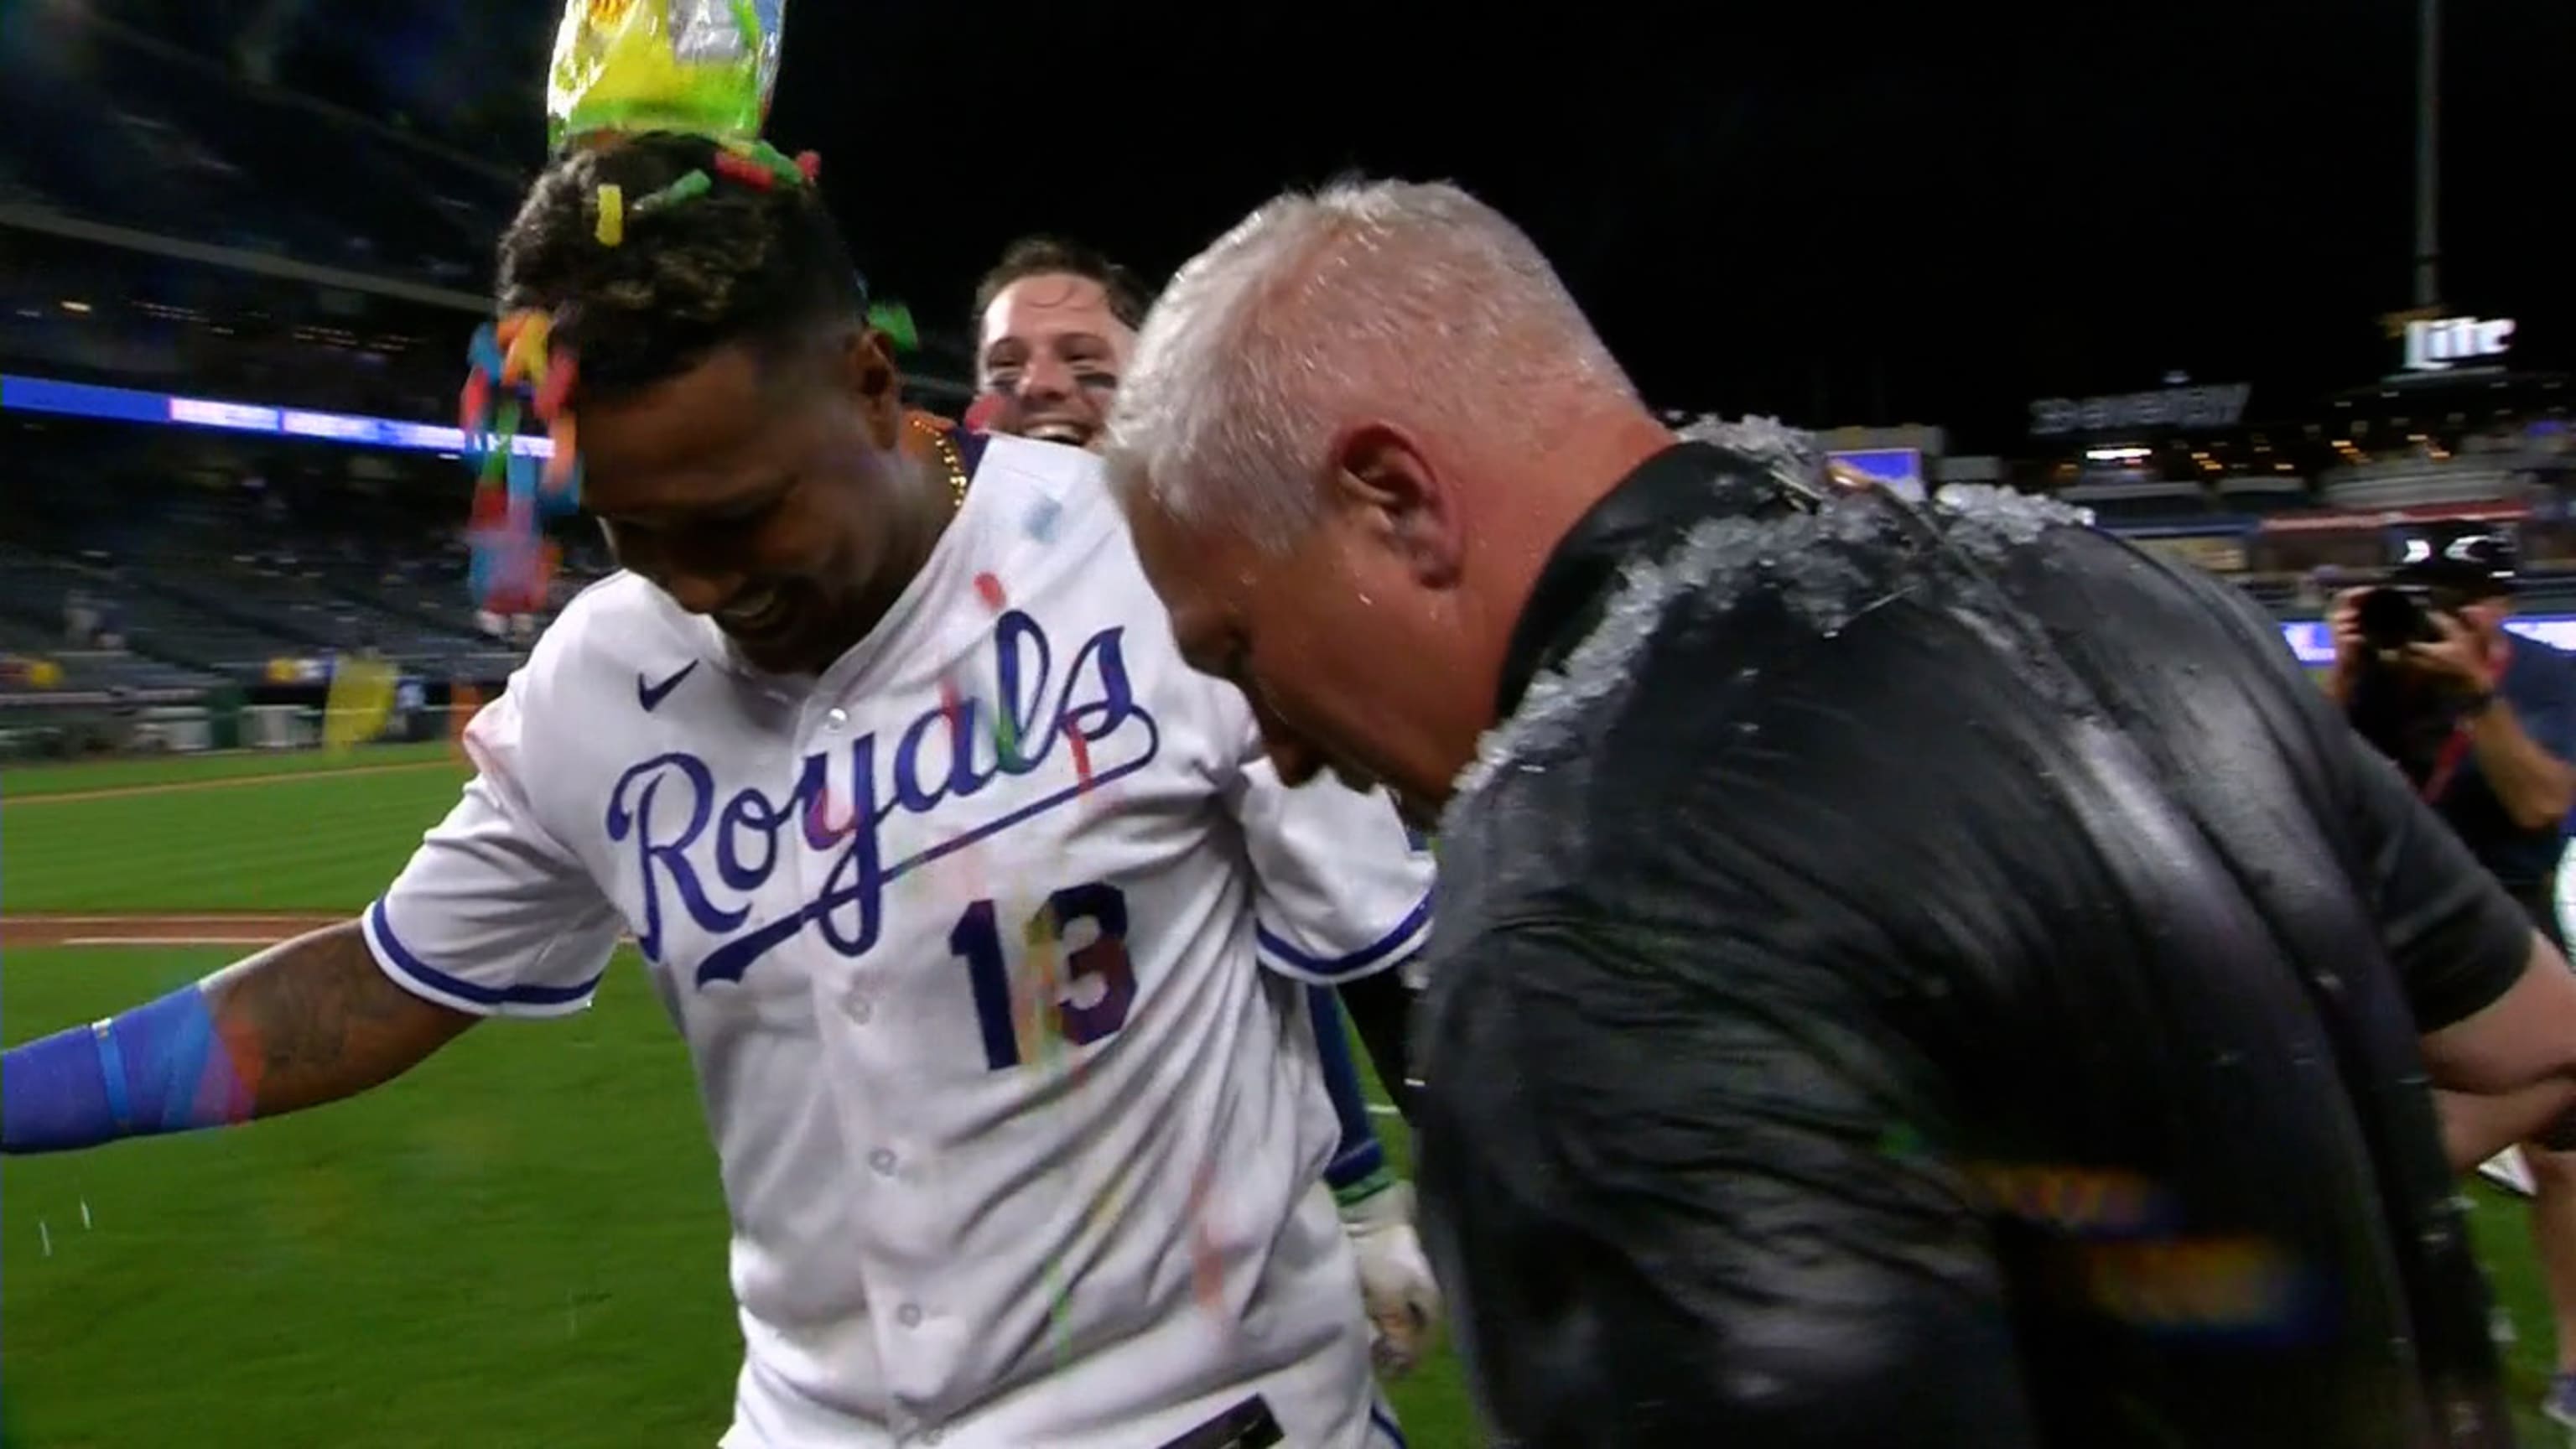 It sure seems like the Royals wildly mishandled Salvador Perez's